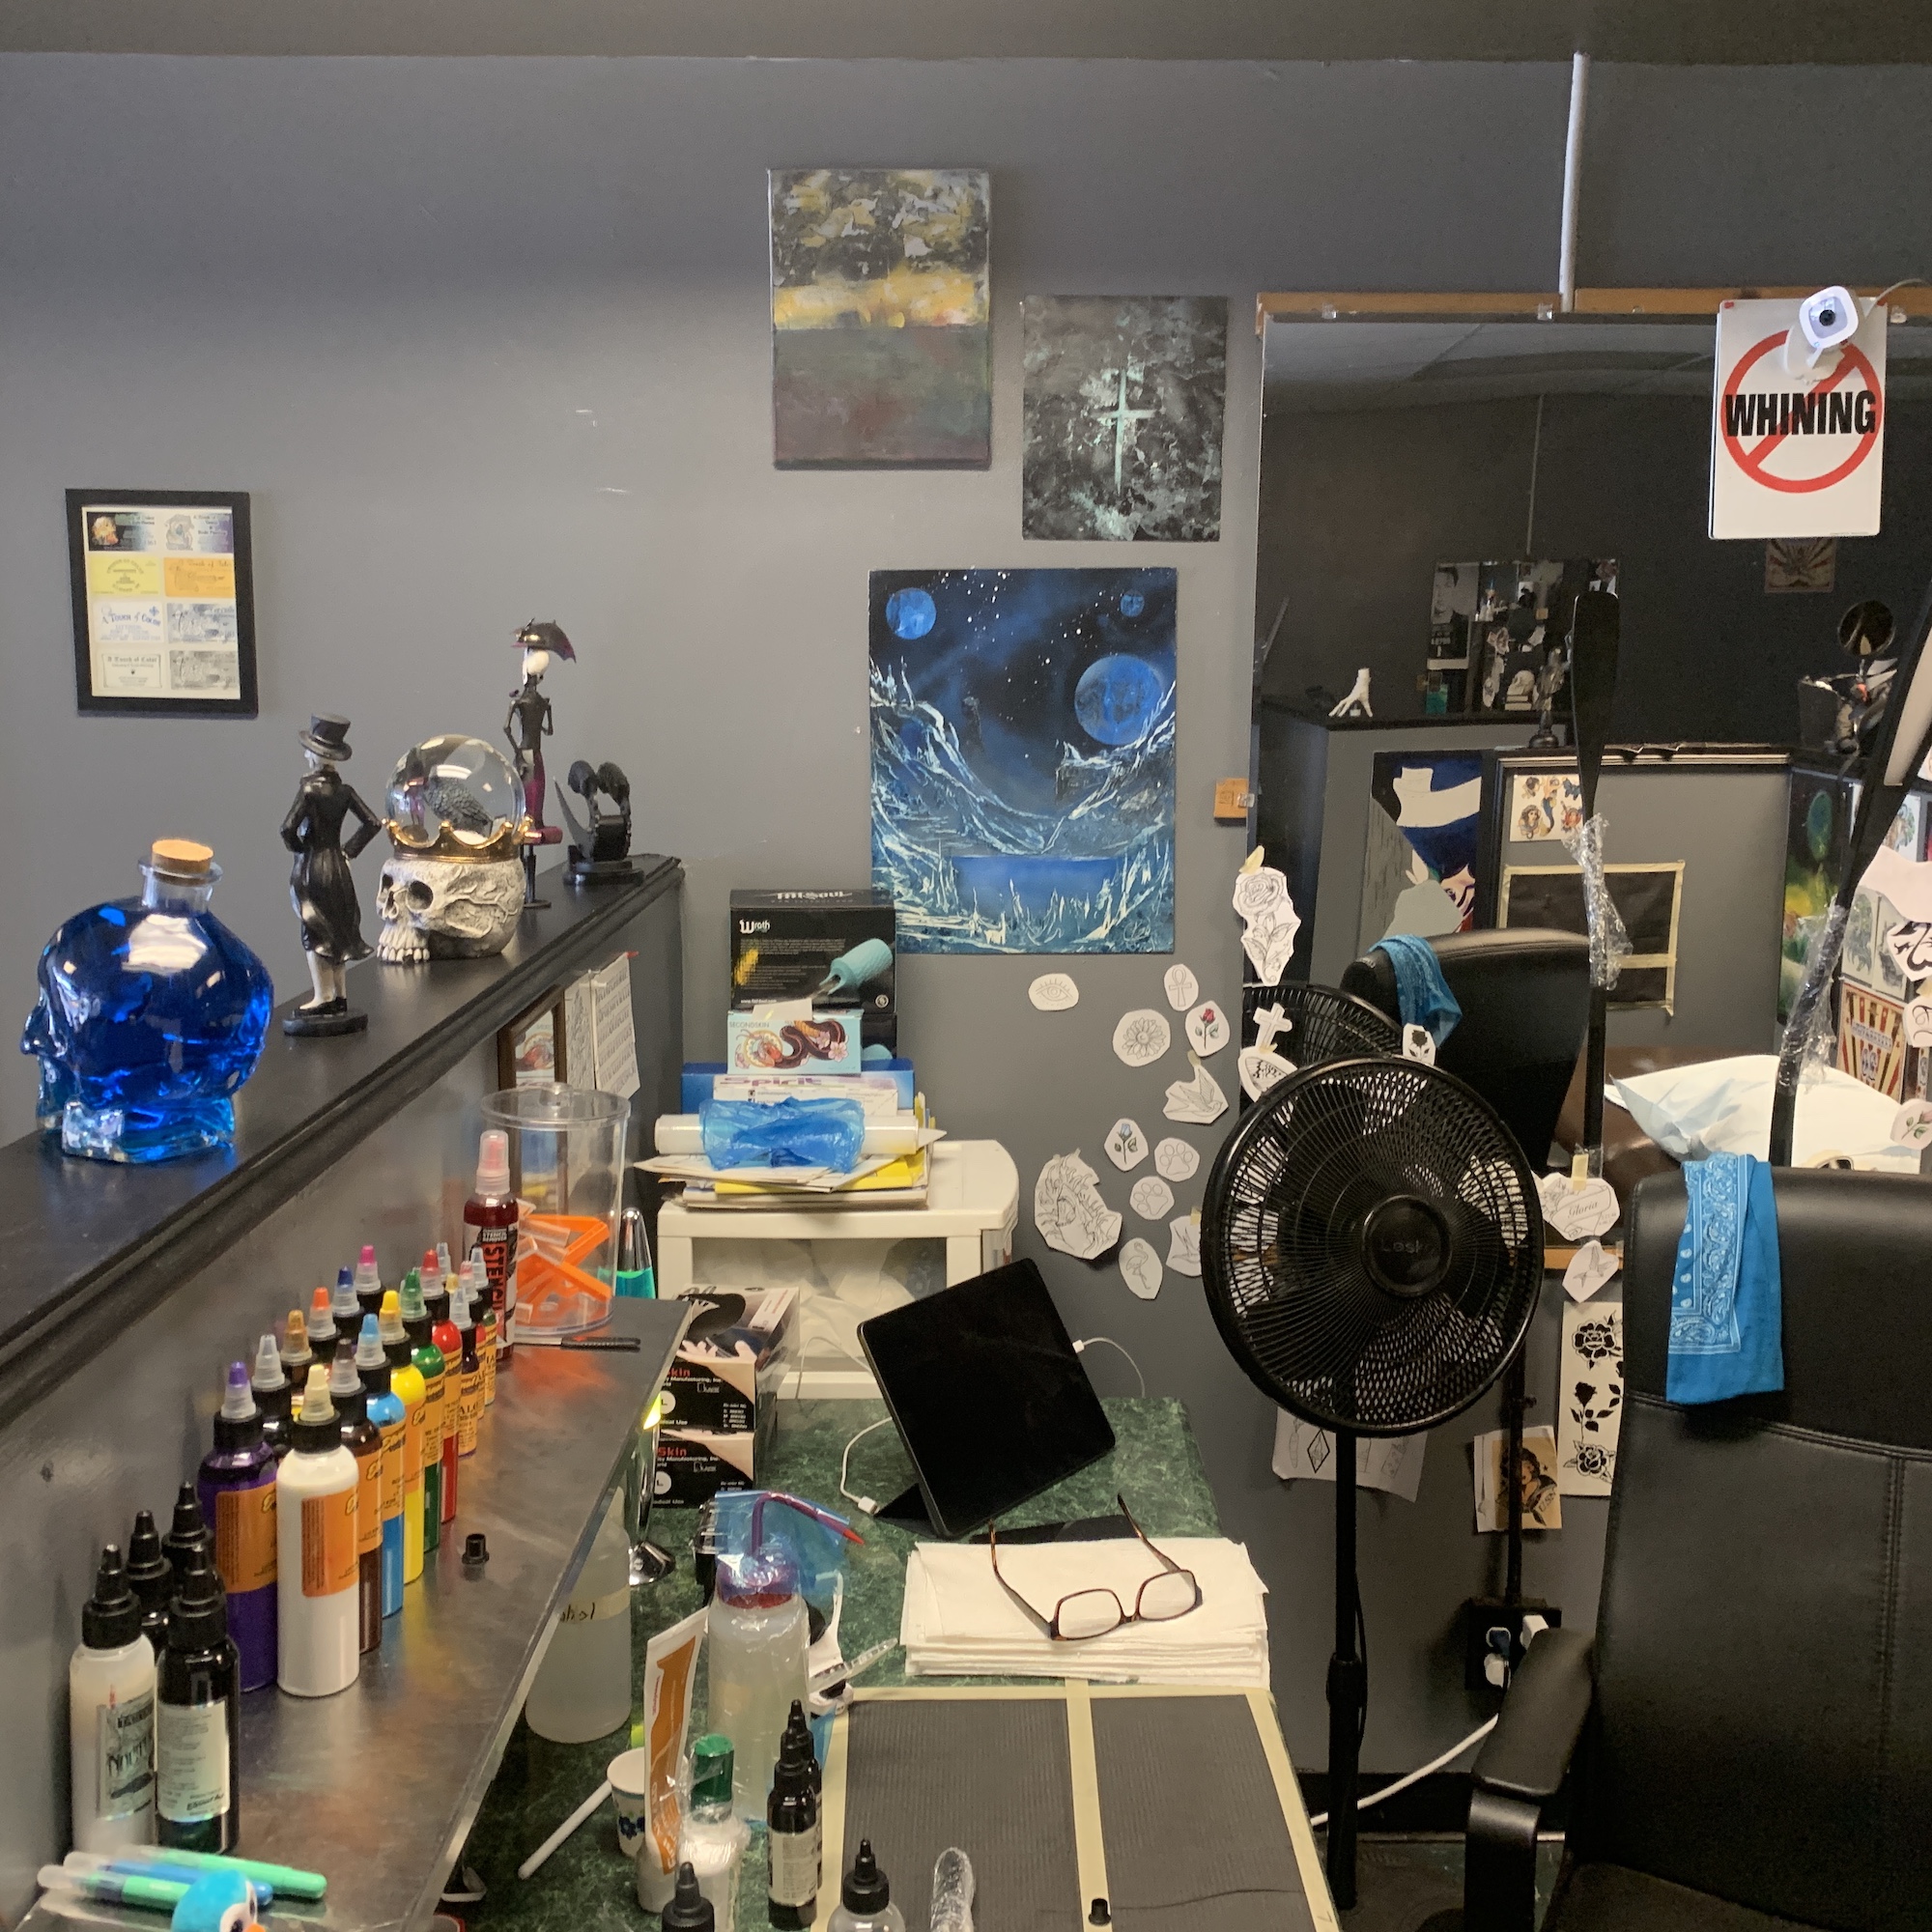 Here is a typical work station at Lovecraft Tattoo Parlor in Hamden, CT. Tattoo parlors were just granted less restrictive zoning laws in the town, making it easier to set up shop and start providing their services to locals in a more convenient manner.